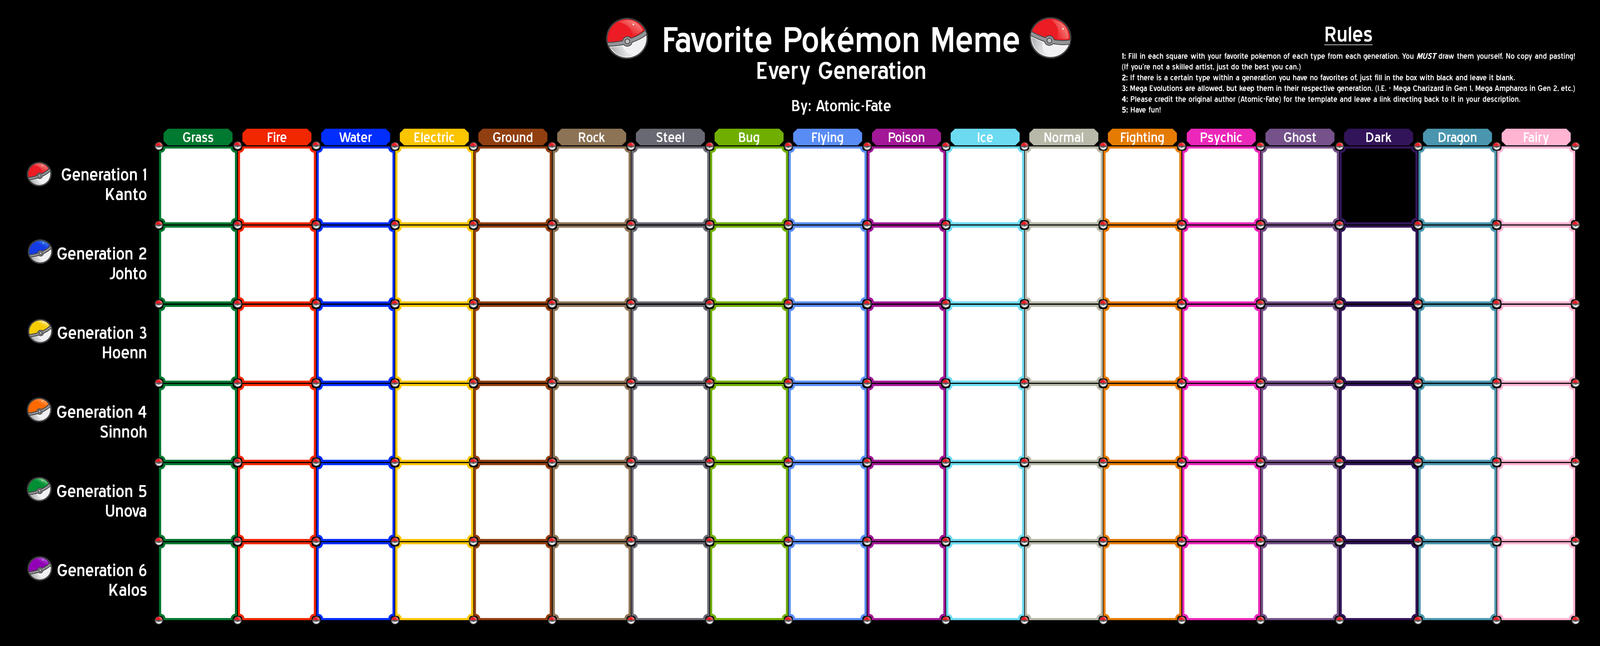 Favorite Pokemon Meme: Every Generation (Template) by Atomic Fate on